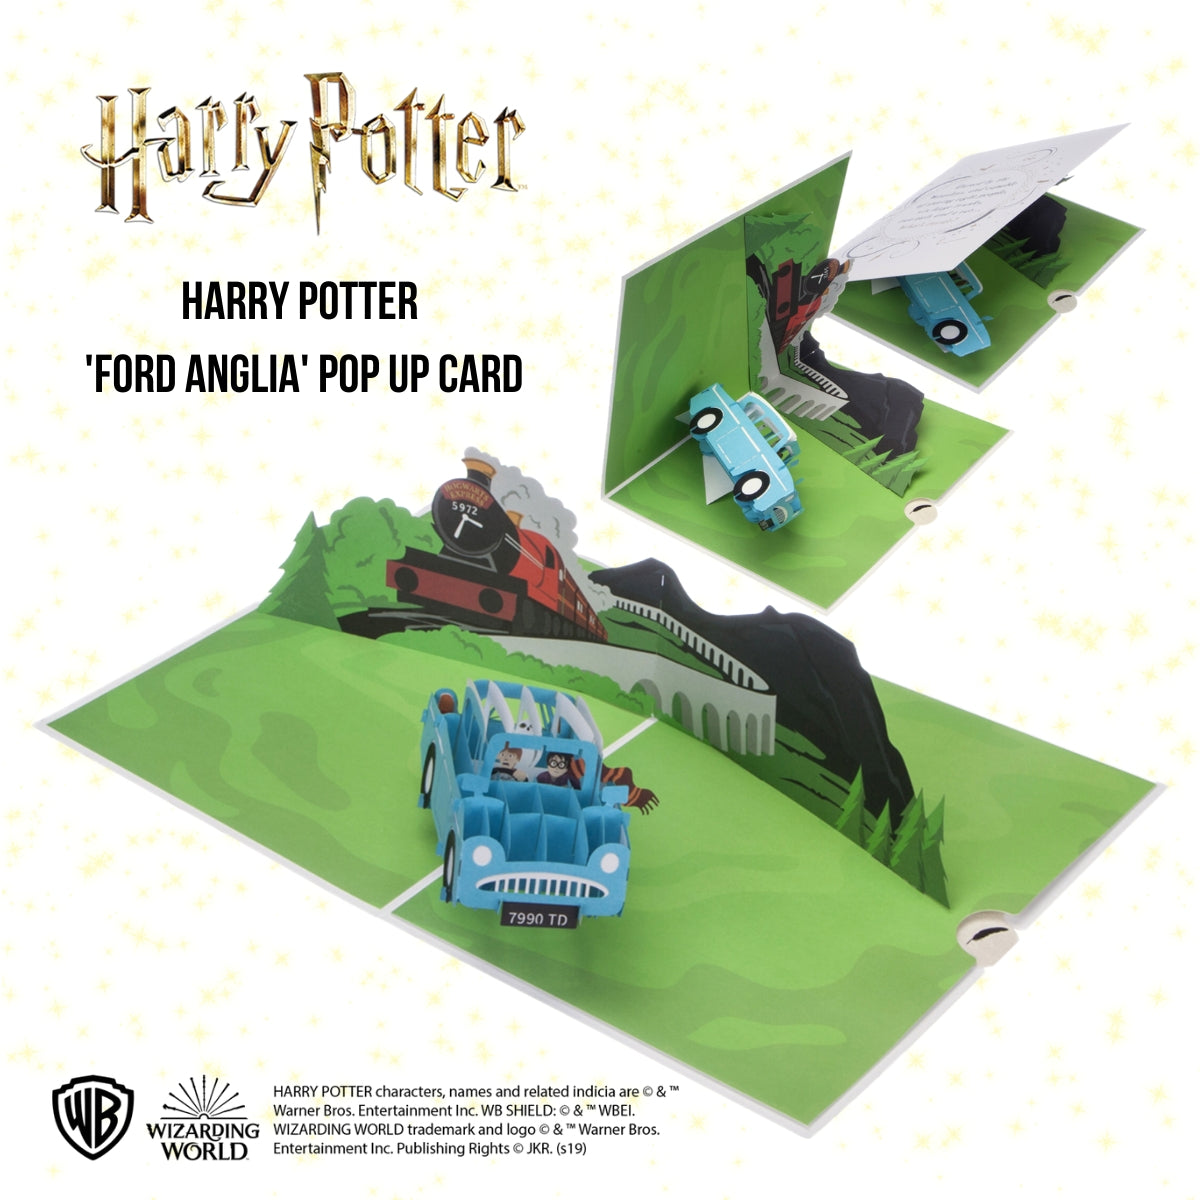 Image showing Harry Potter Flying Ford Anglia Pop Up Birthday Card open at 180 degrees and closing in stages